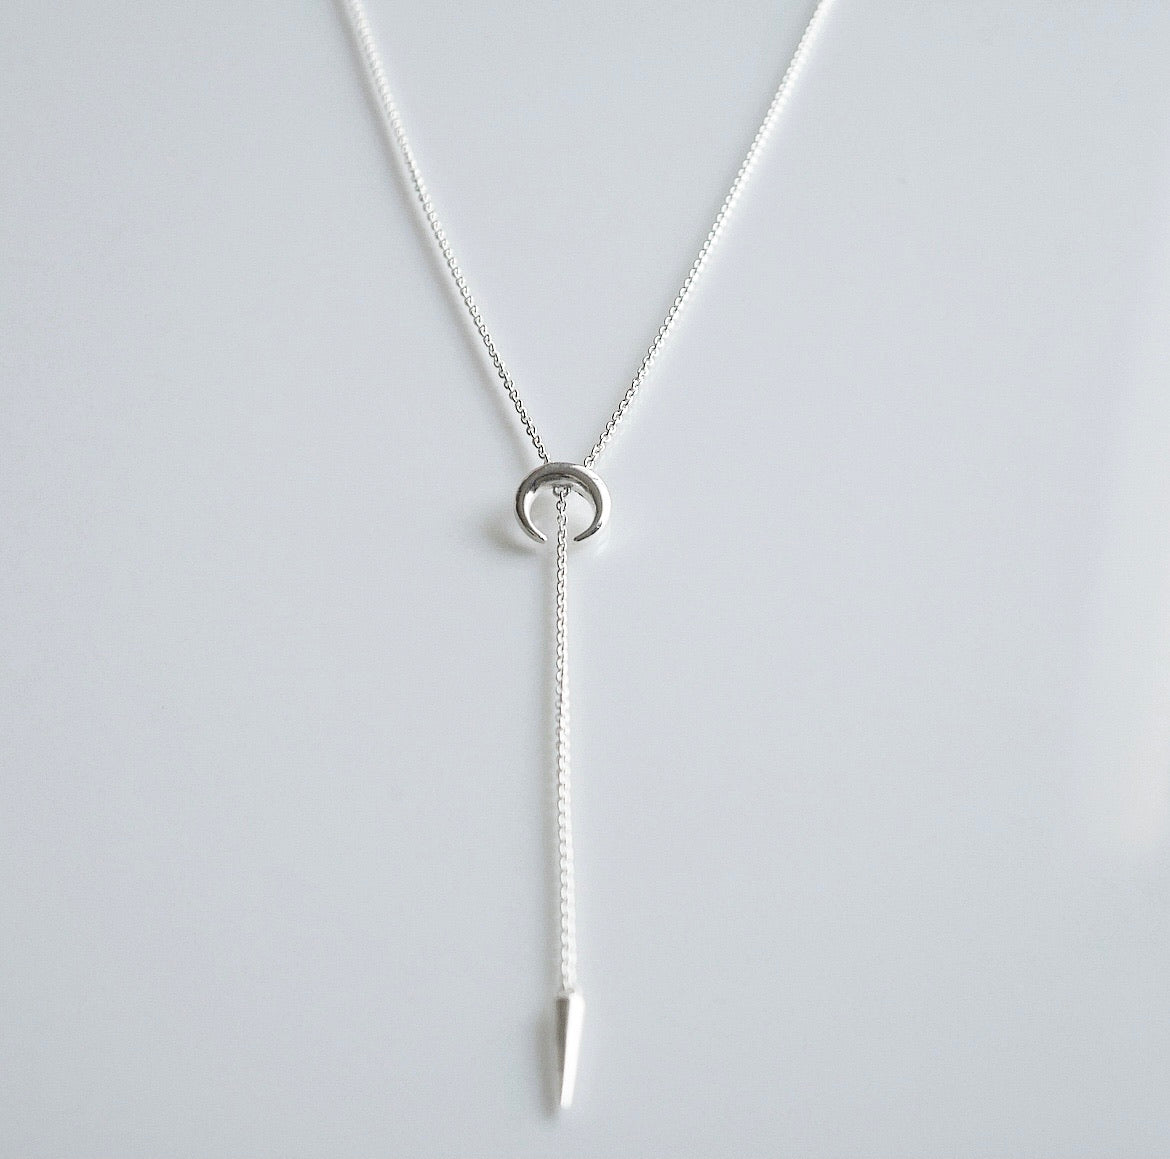 necklaces, silver necklace, 925 sterling silver necklaces, lariat necklaces, y necklaces, waterproof jewelry, fashion jewelry, statement necklaces, white gold necklaces, statement necklaces, birthday gifts, long necklaces, crescent necklaces, moon necklaces, half moon necklace, kesley jewelry, trending accessories, fine jewelry, nice necklaces, cool jewelry